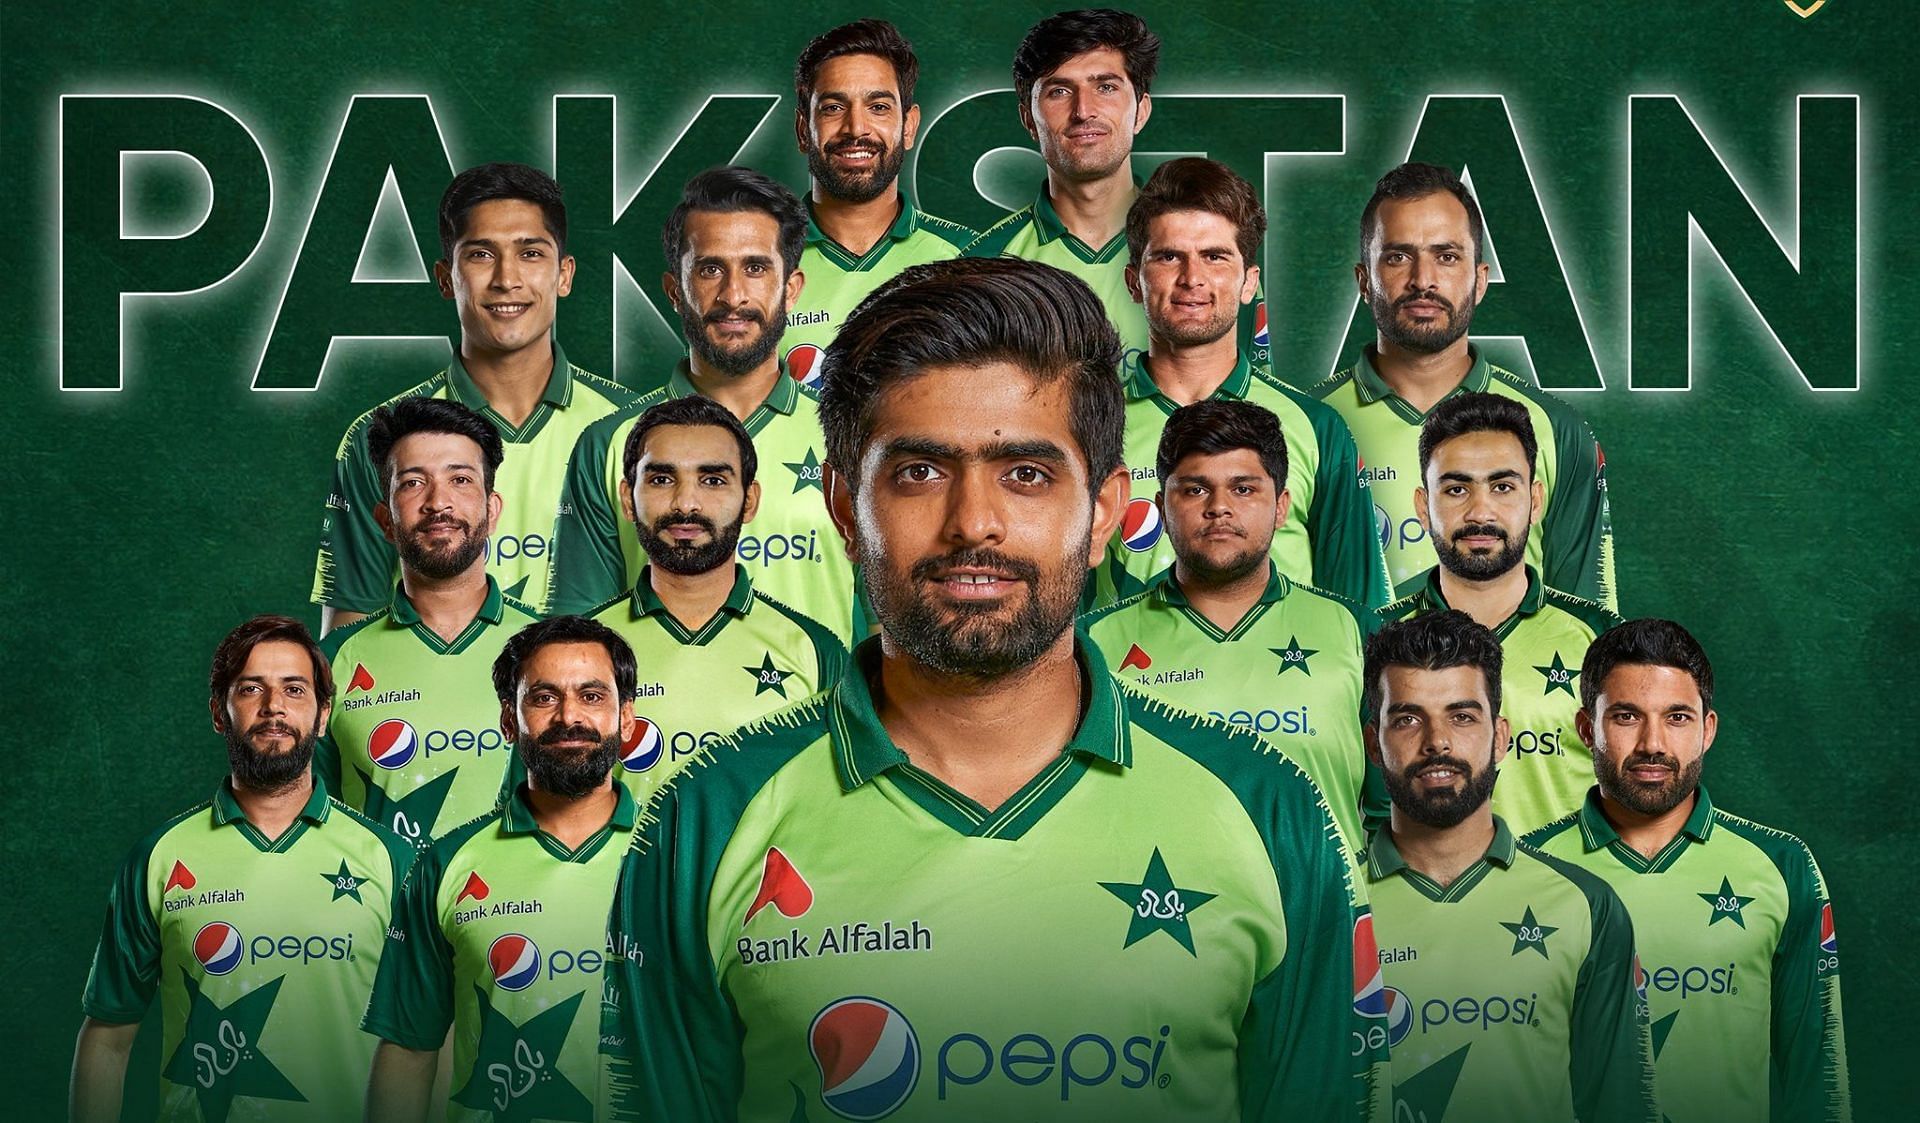 Pakistan reached the finals of the 2022 T20 World Cup.